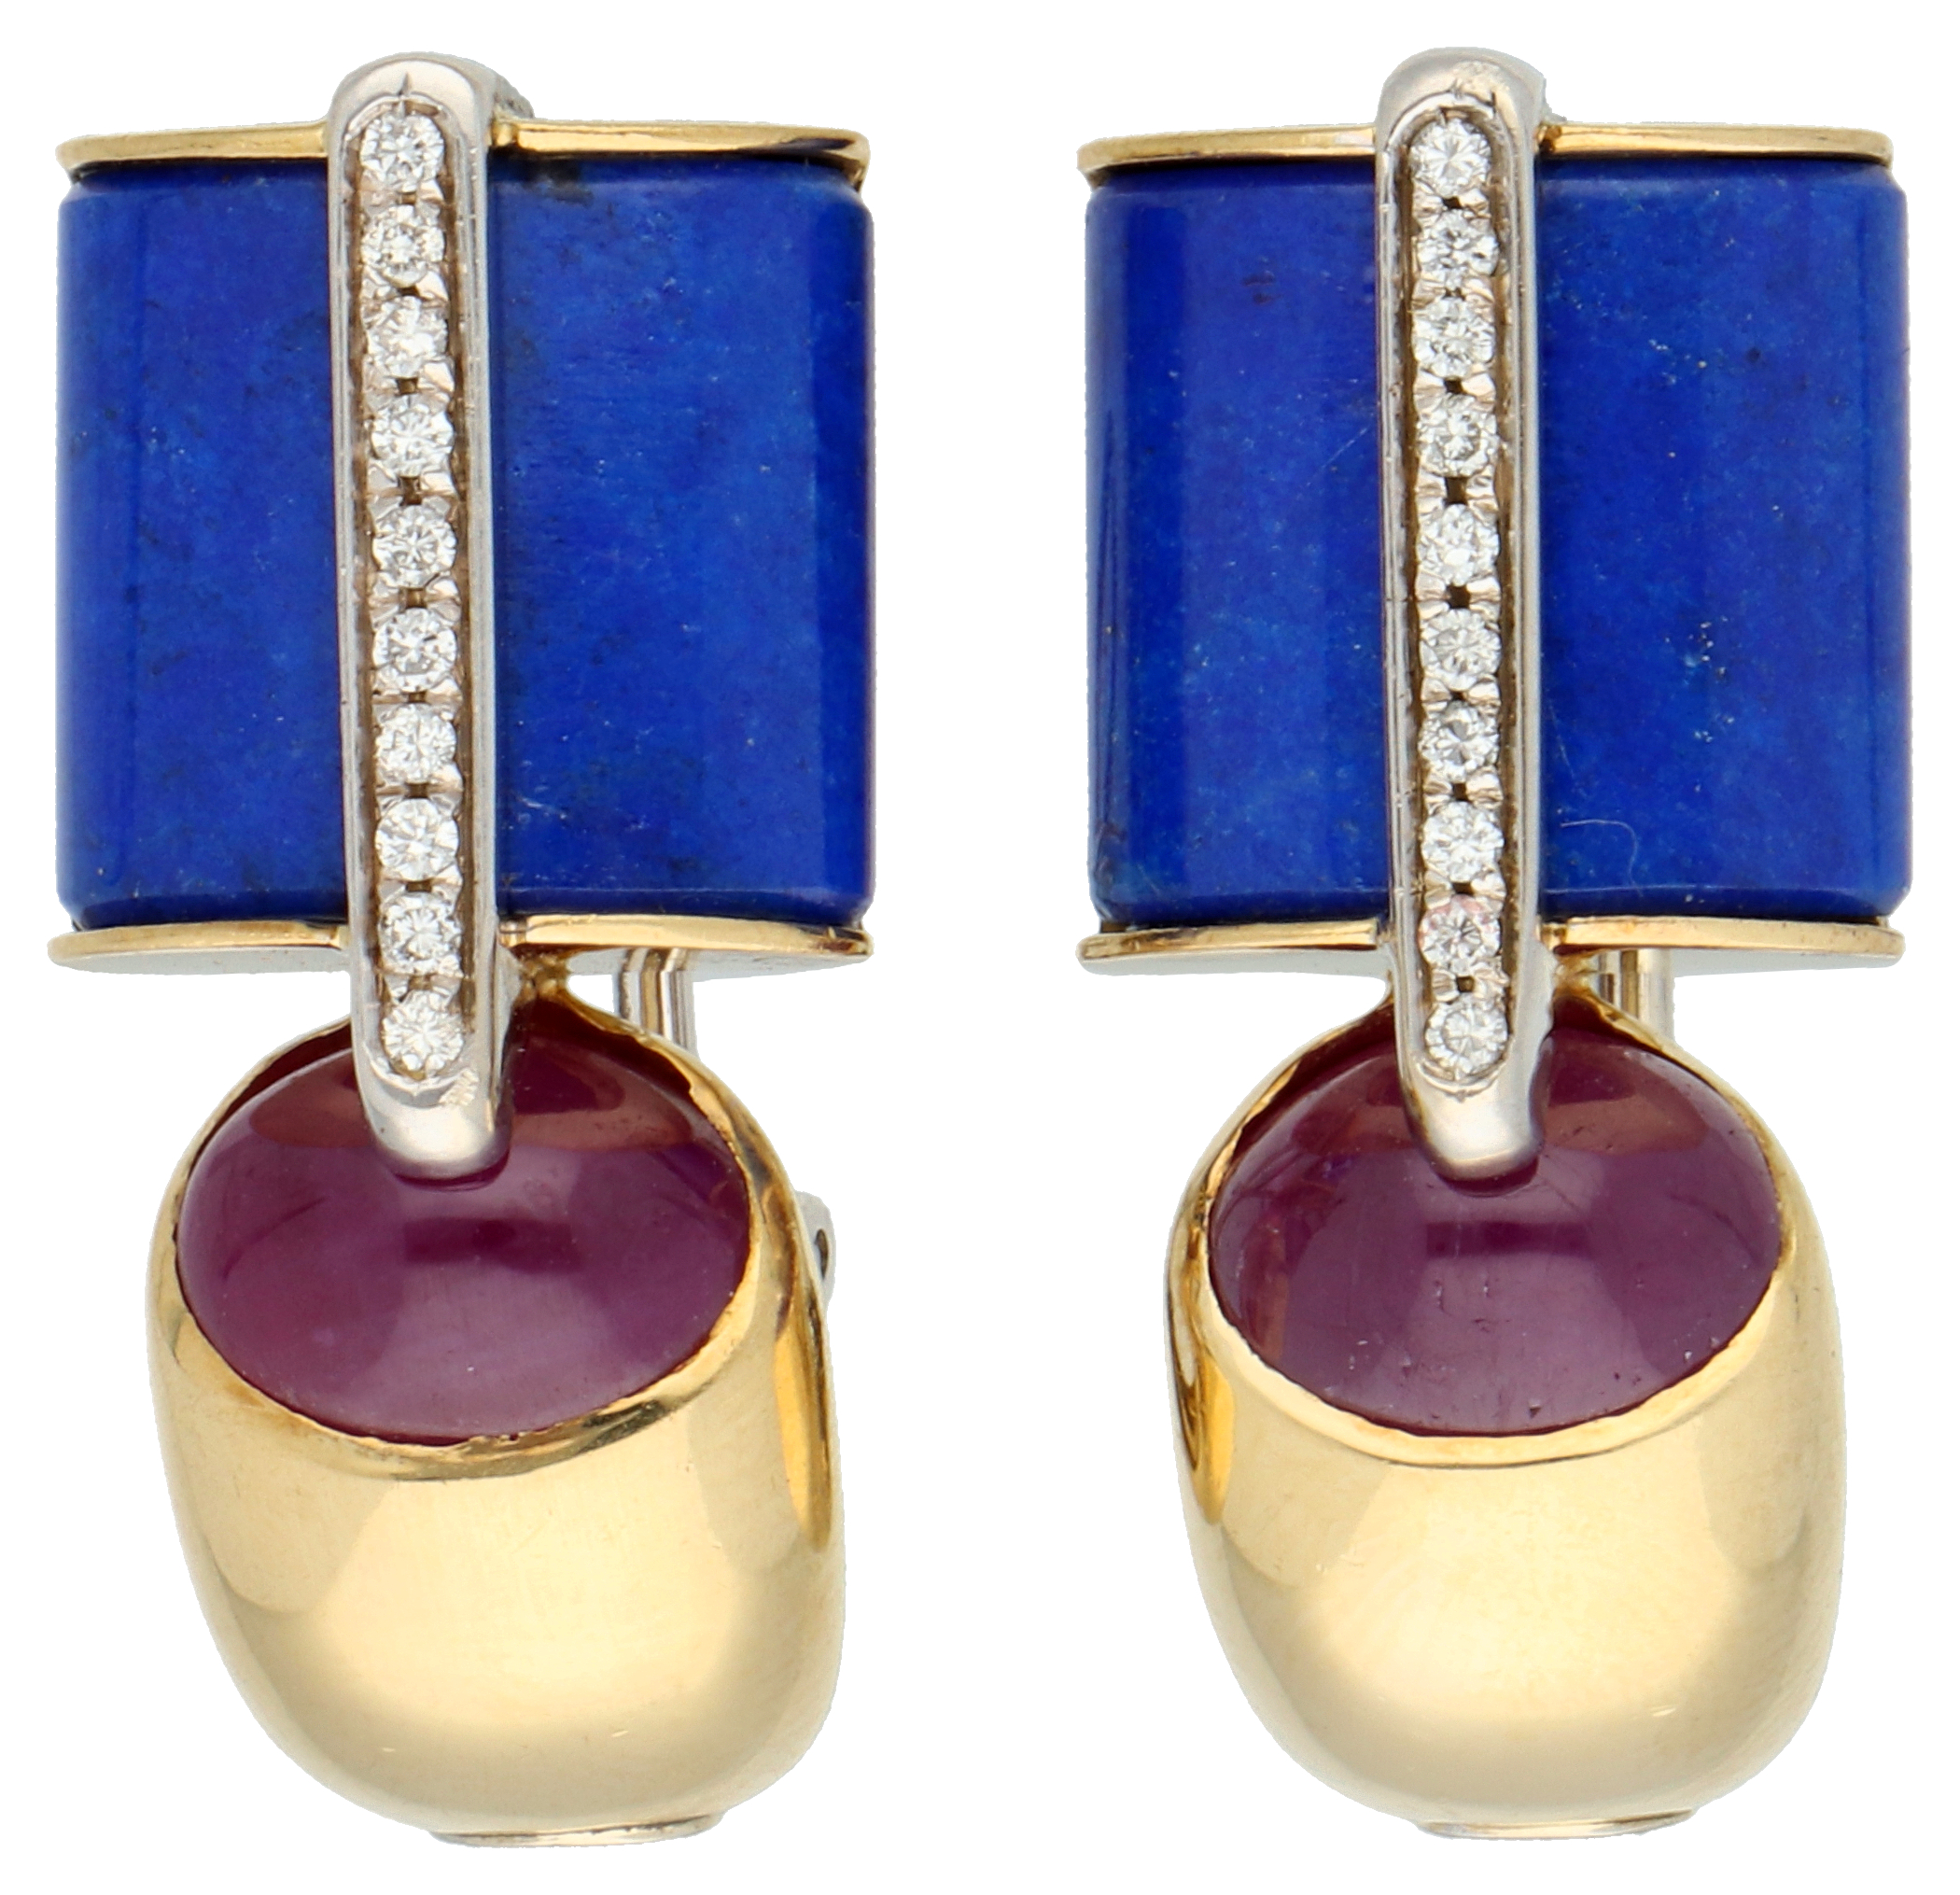 No Reserve - 18K Yellow gold Centoventuno design stud earrings with lapis lazuli and ruby.